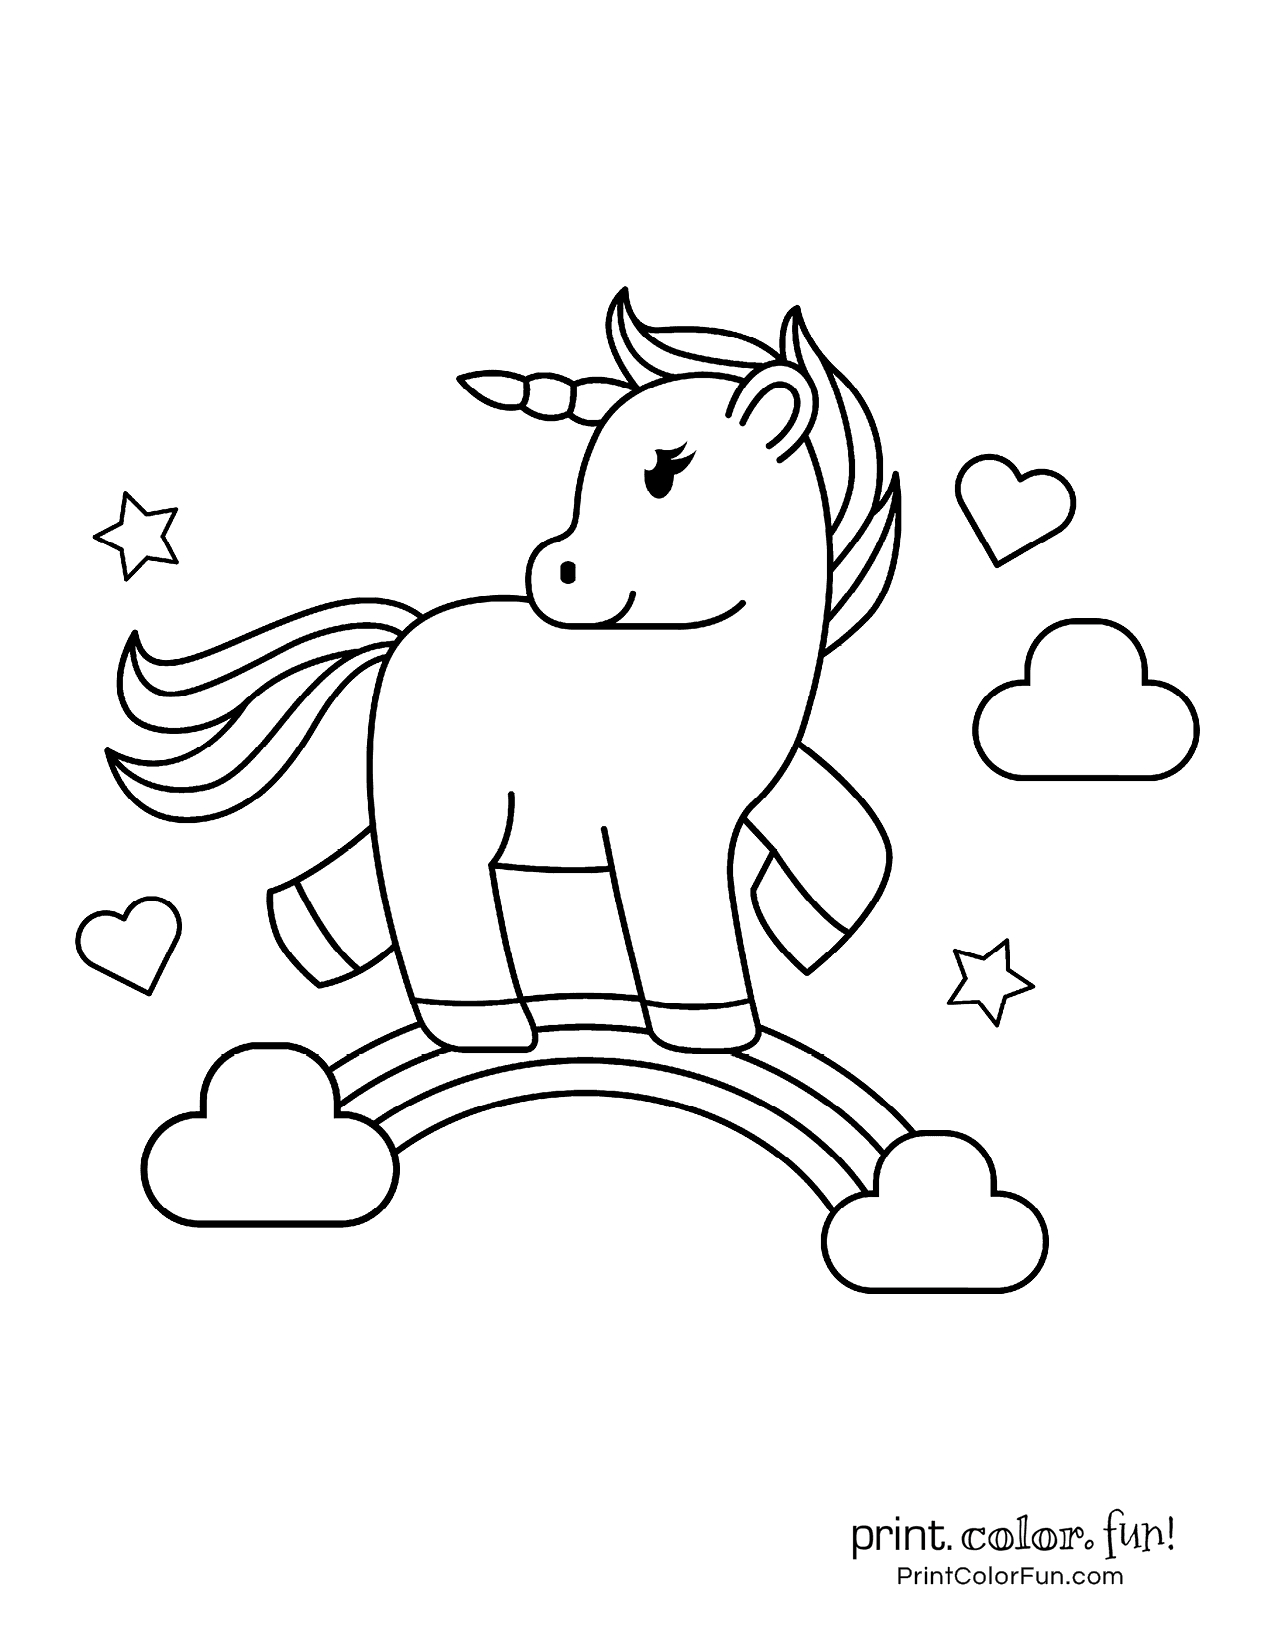 Unicorn Color Page Cute My Little Unicorn 5 Different Coloring Pages To Print Coloring